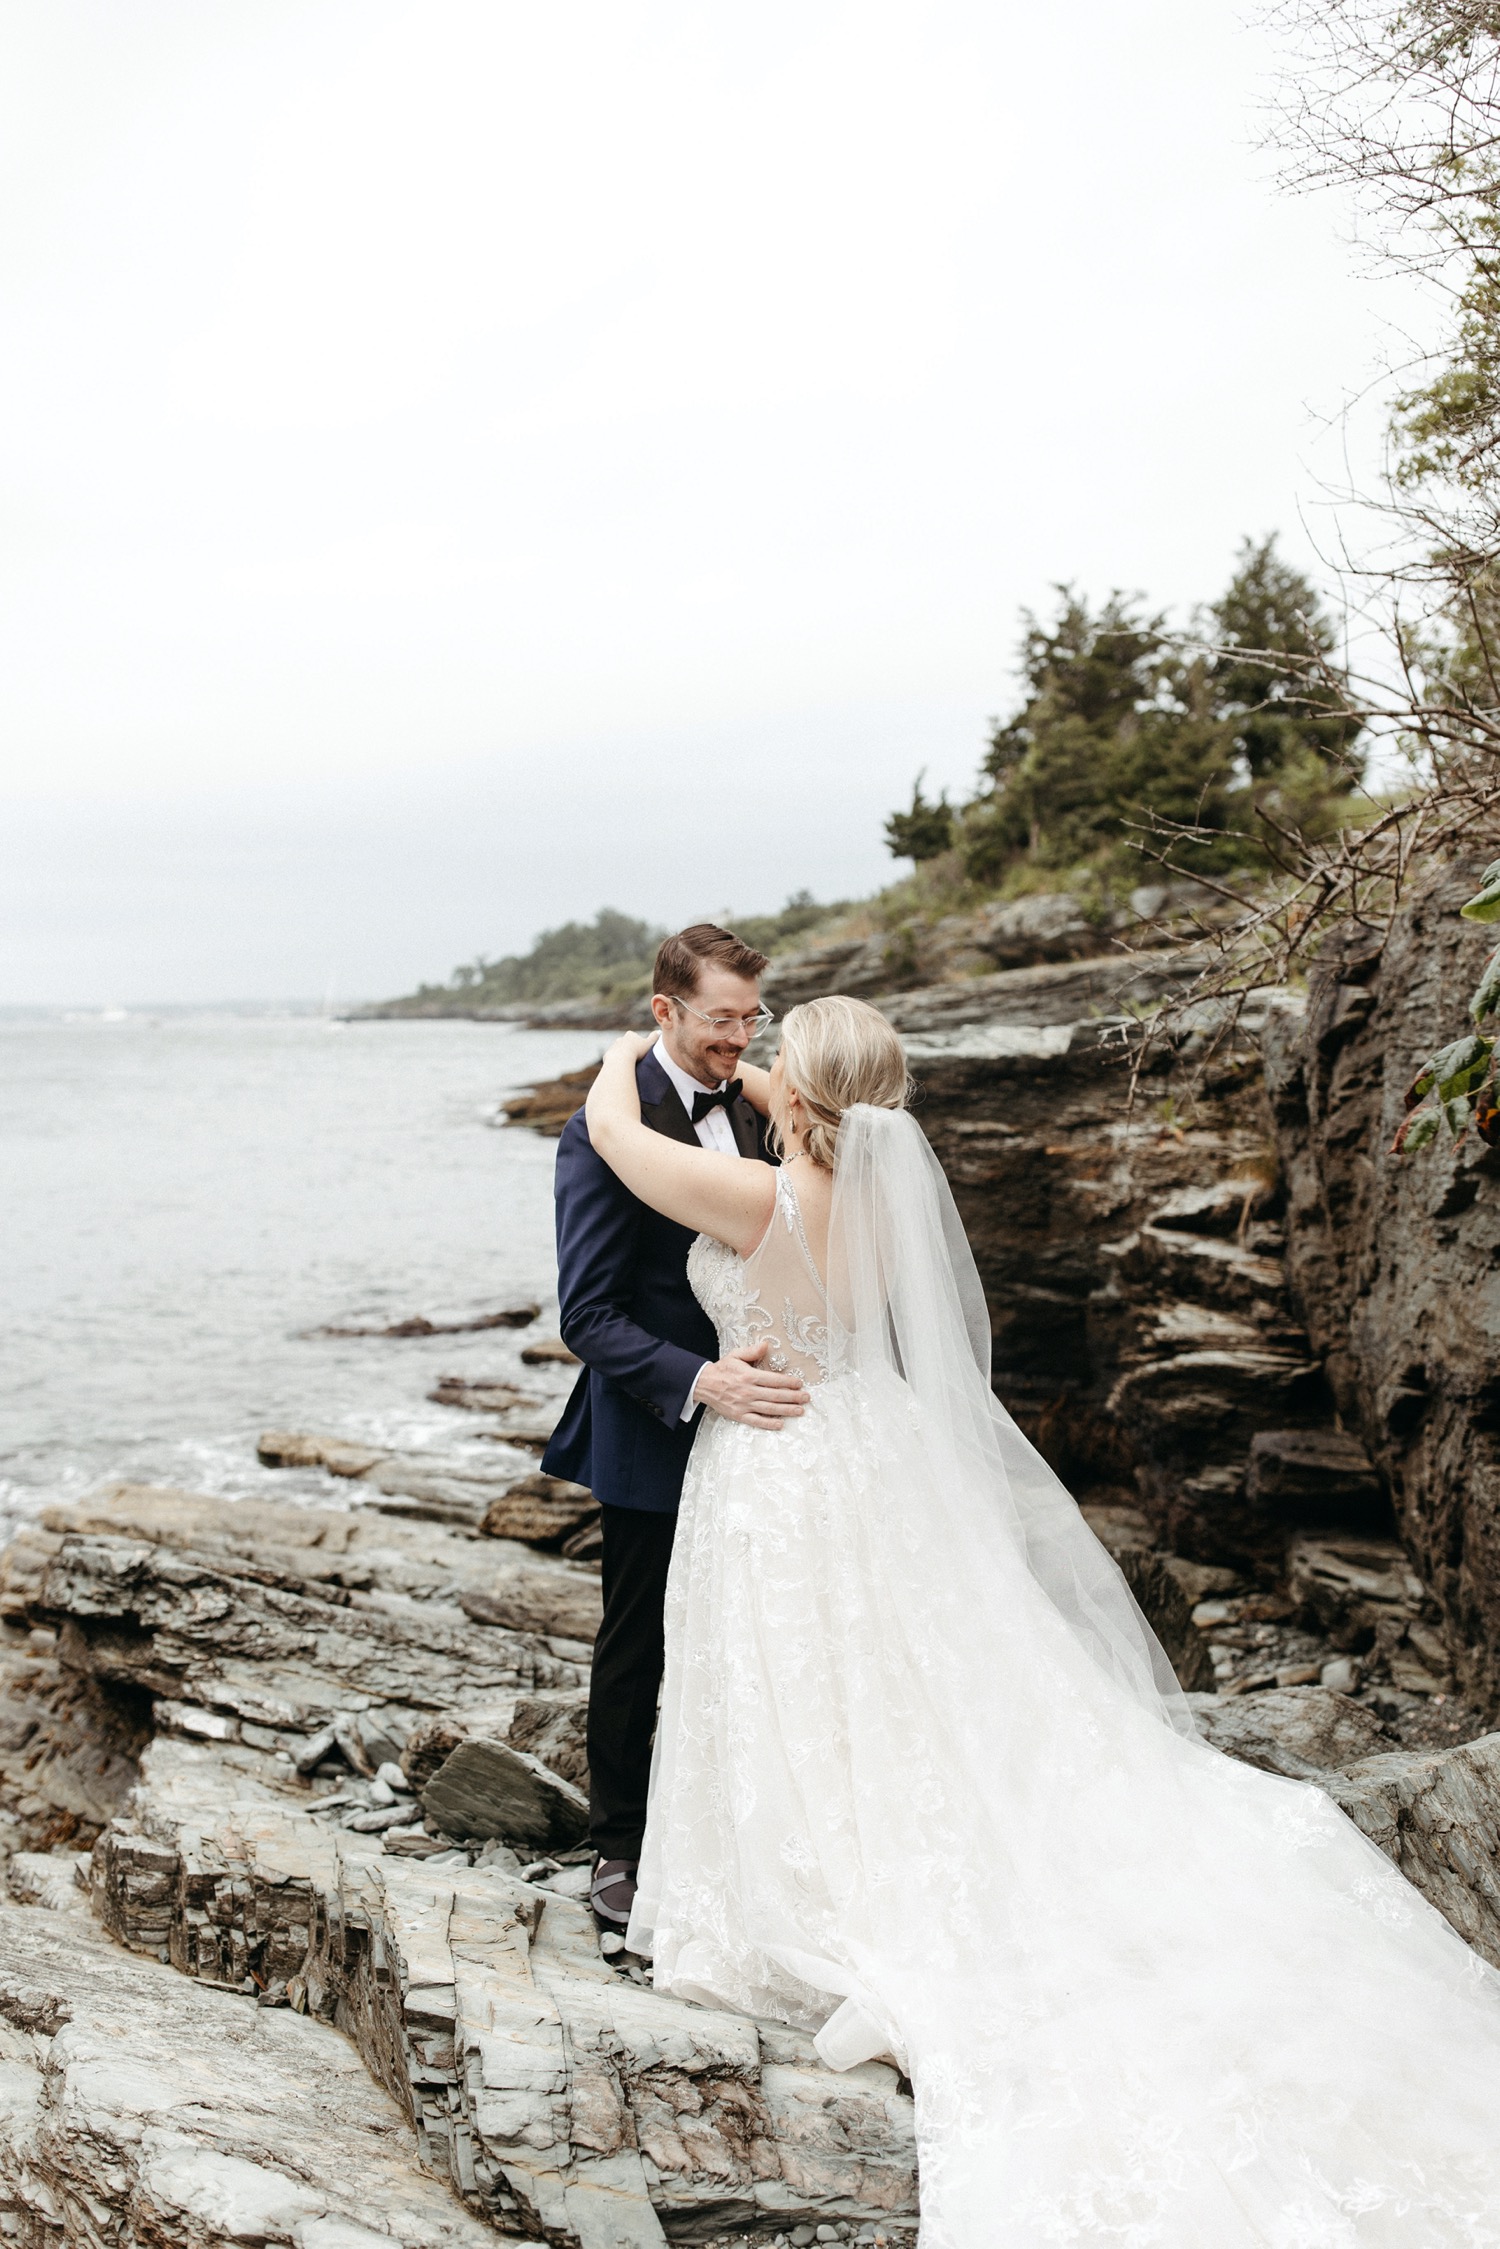 A Luxurious Newport Wedding at Castle Hill Inn - Scarlet Roots Photography